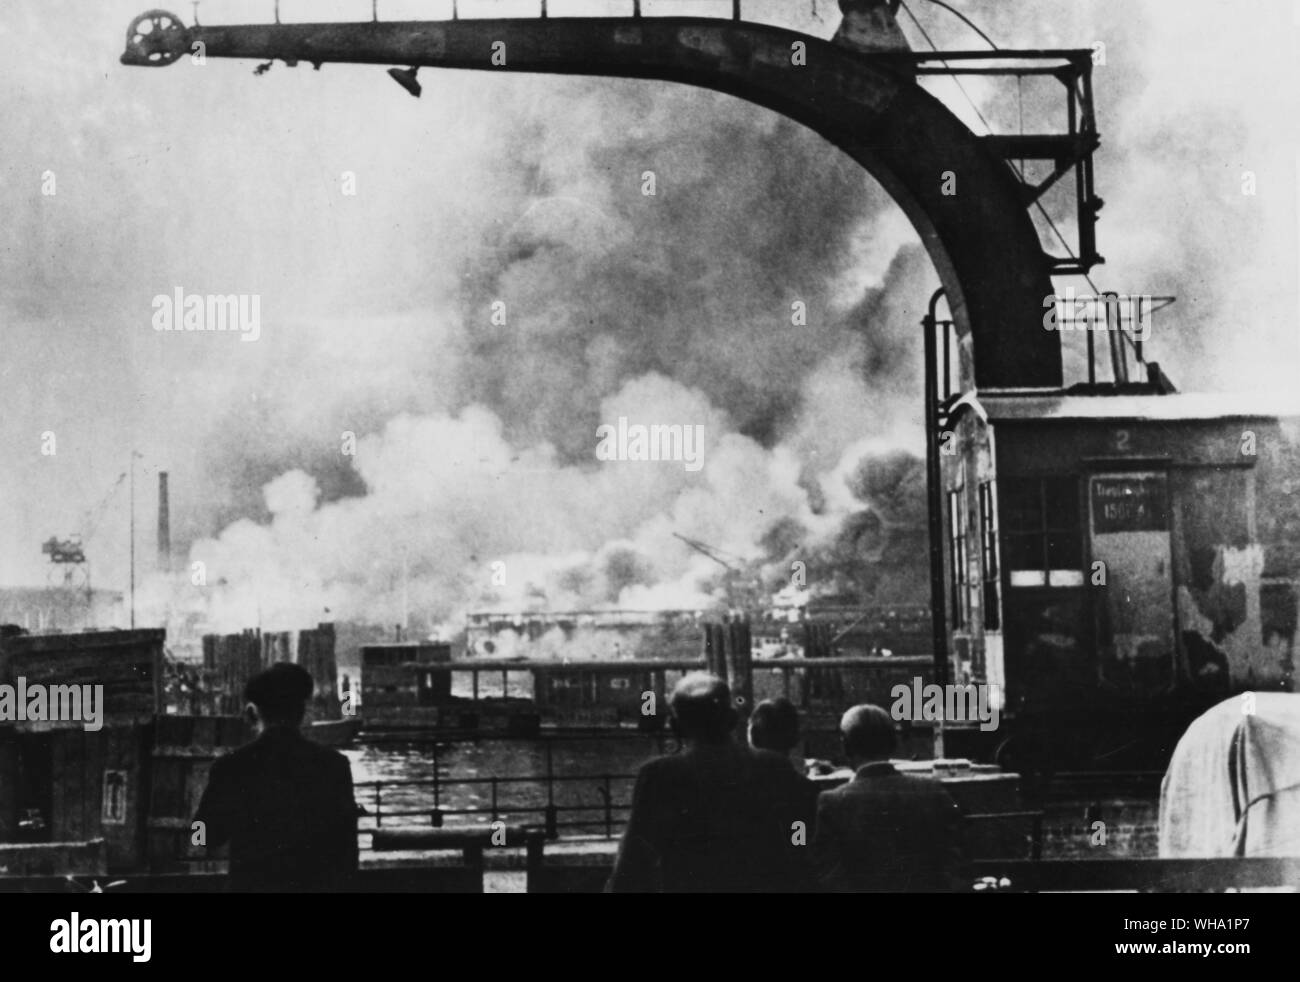 WW2: Flames and smoke fill the sky around the German works where submarines were under construction of their war-machine. 8th August 1944. Captured German photo. Stock Photo